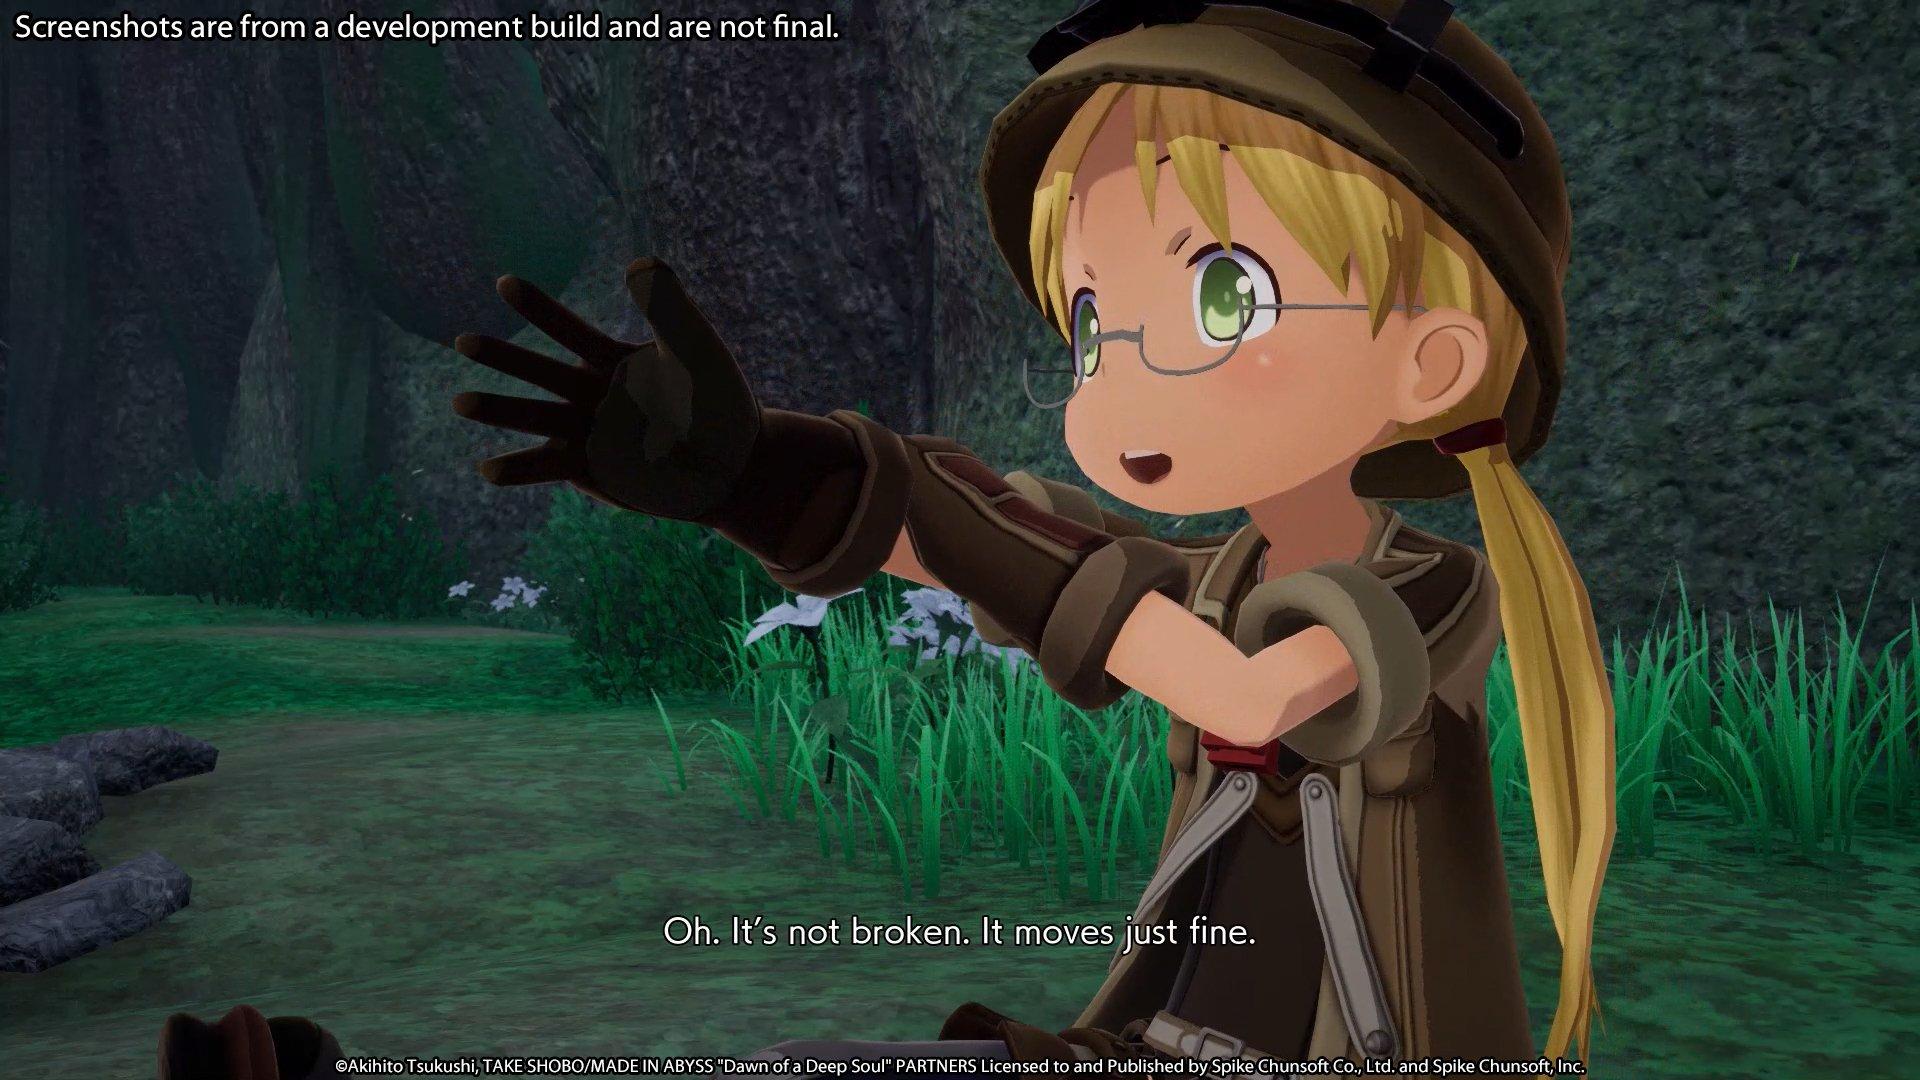 Made in Abyss: Dawn of the Deep Soul Returns to U.S. Theaters